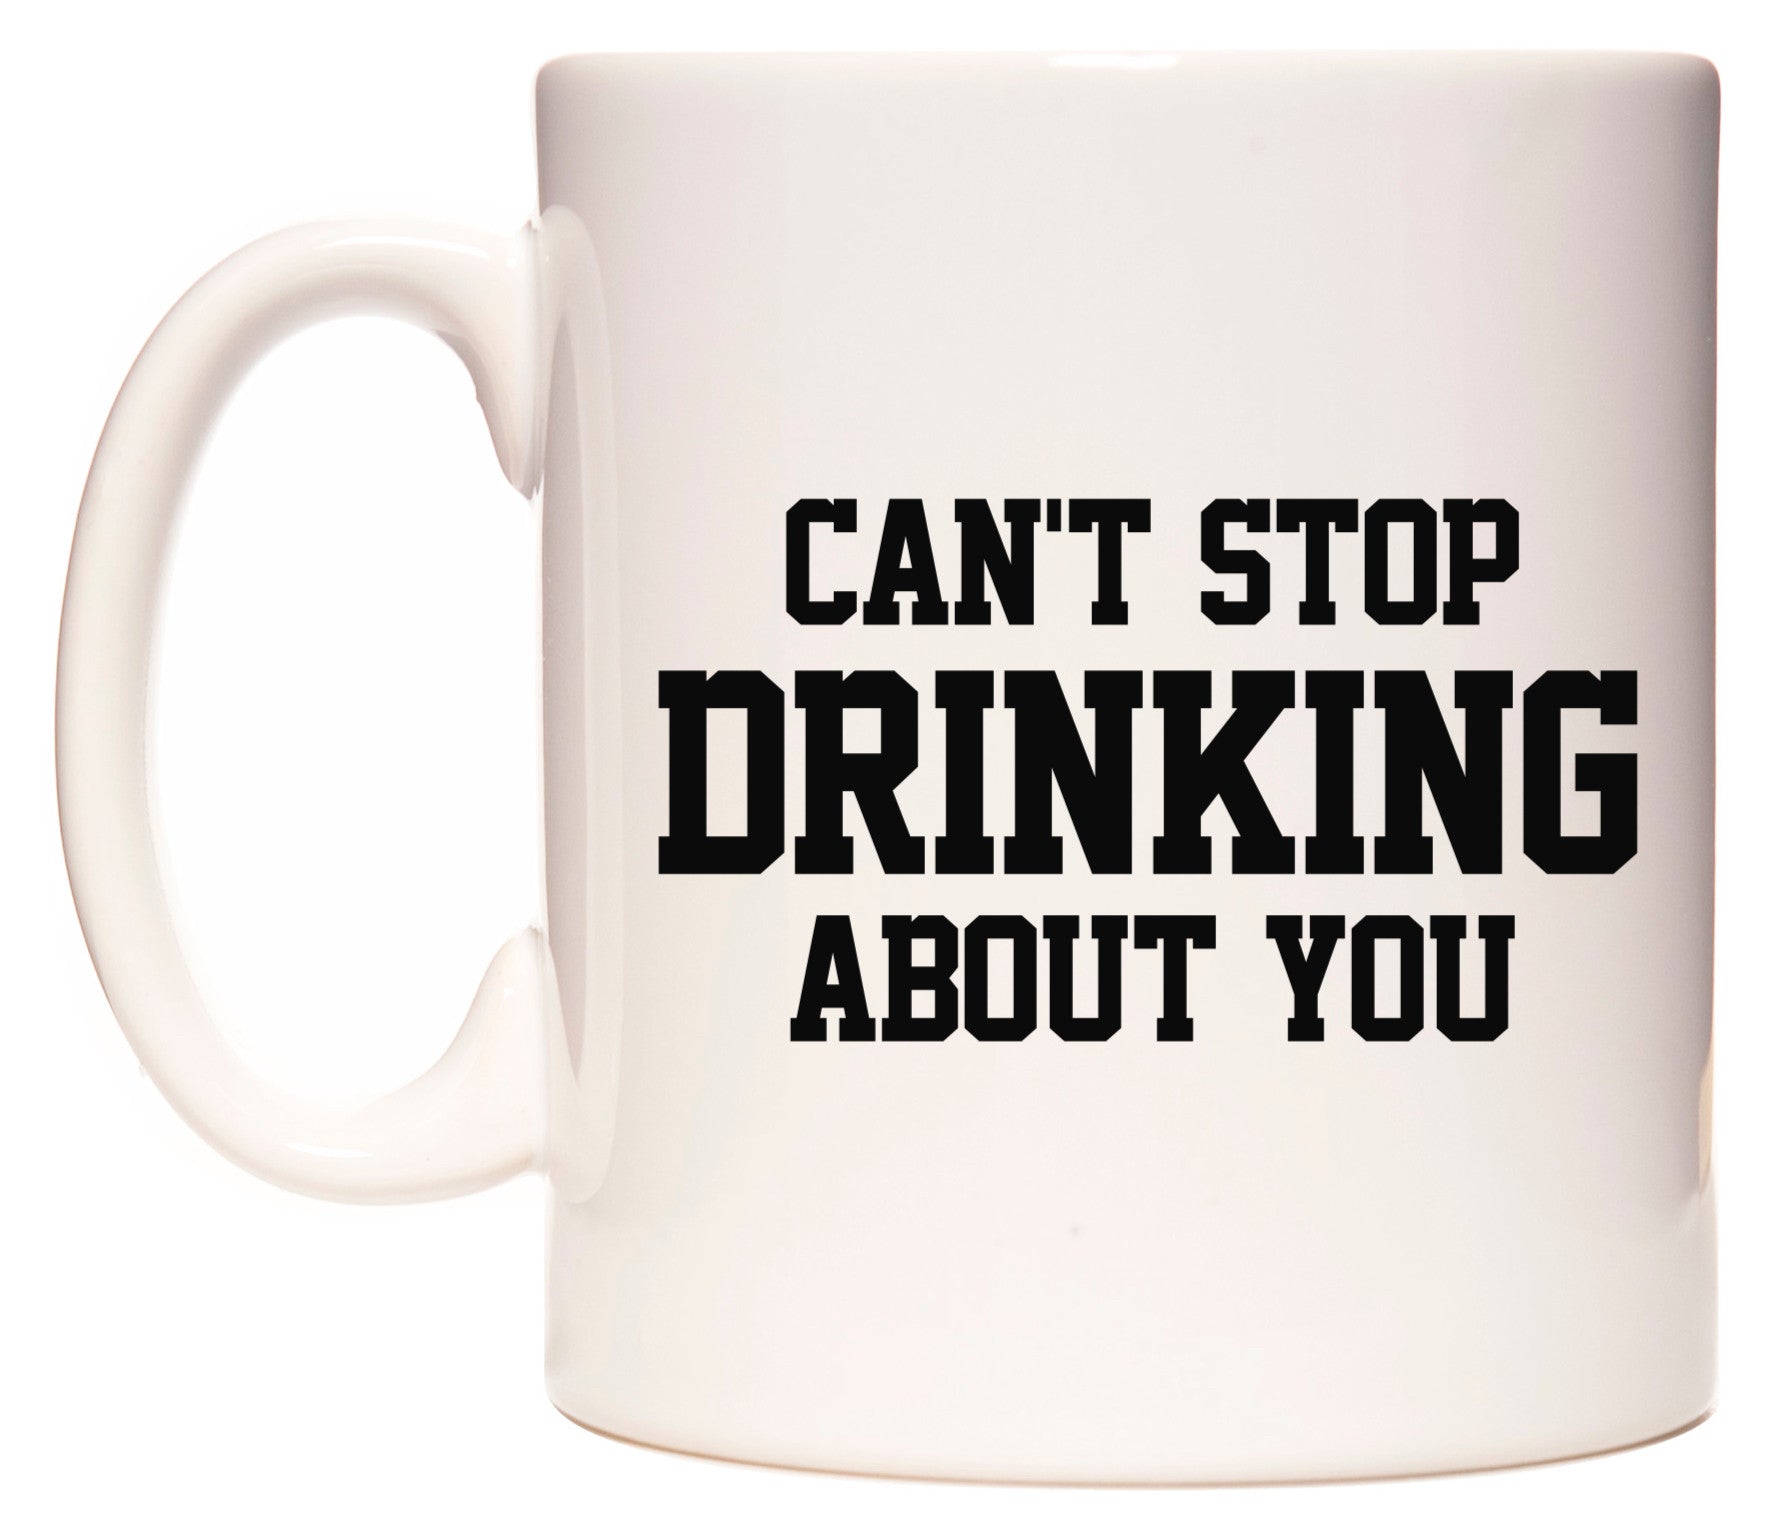 This mug features CAN'T STOP DRINKING ABOUT YOU